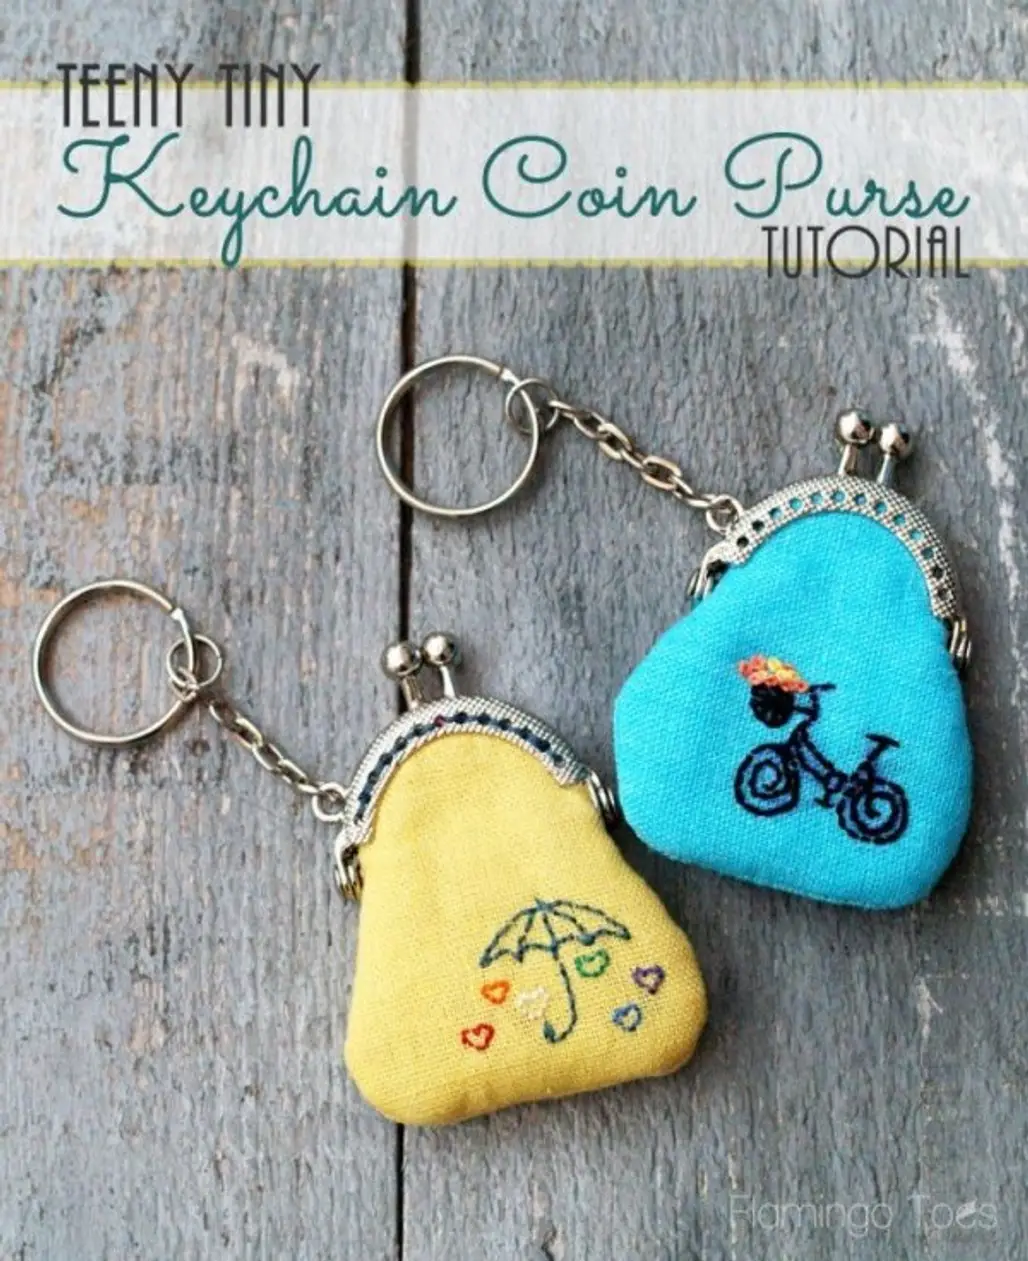 Teeny Tiny Embroidered Key Chain Coin Purses Imagine What Fun